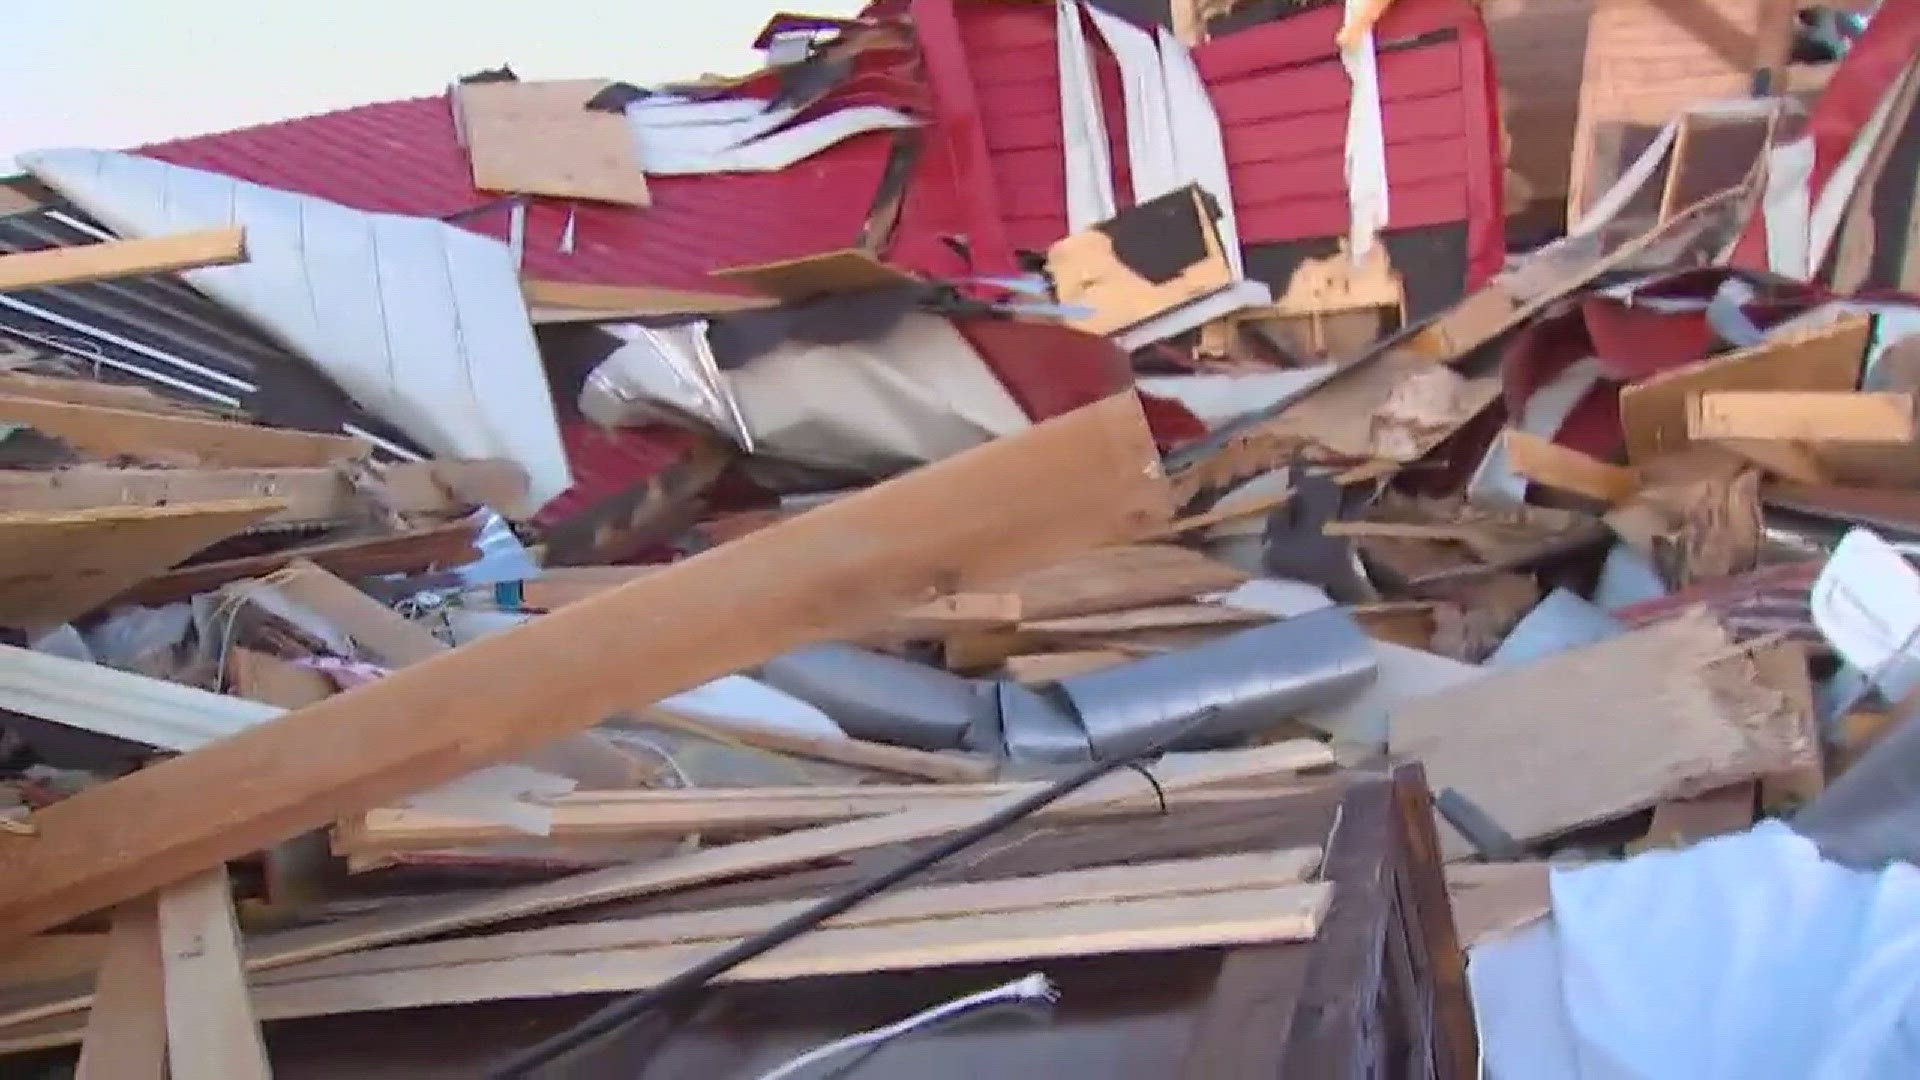 Canton mayor speaks about city's tornado recovery